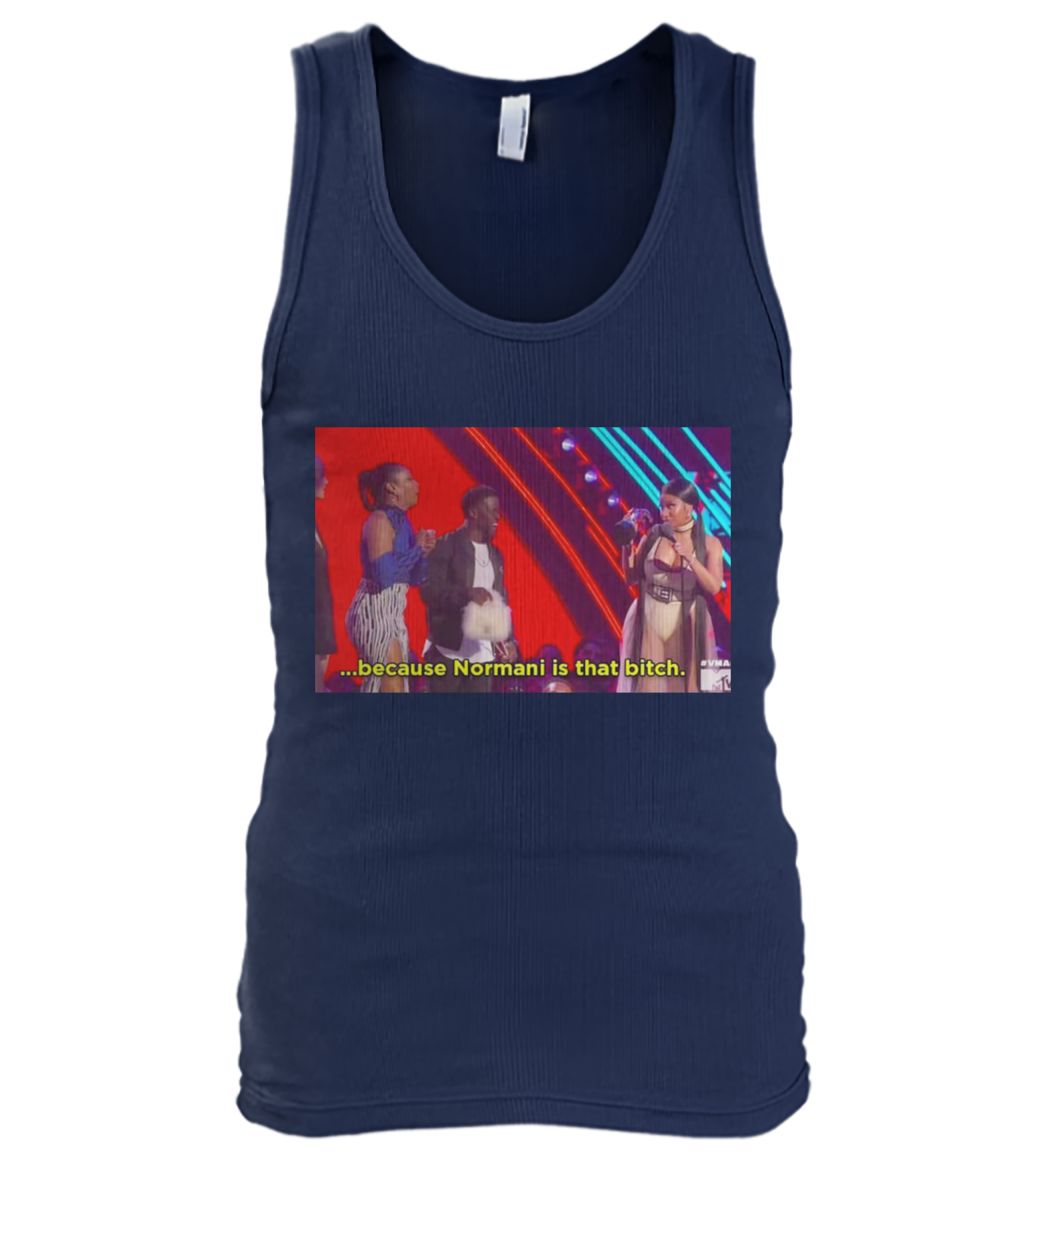 Because normani is that bitch men's tank top